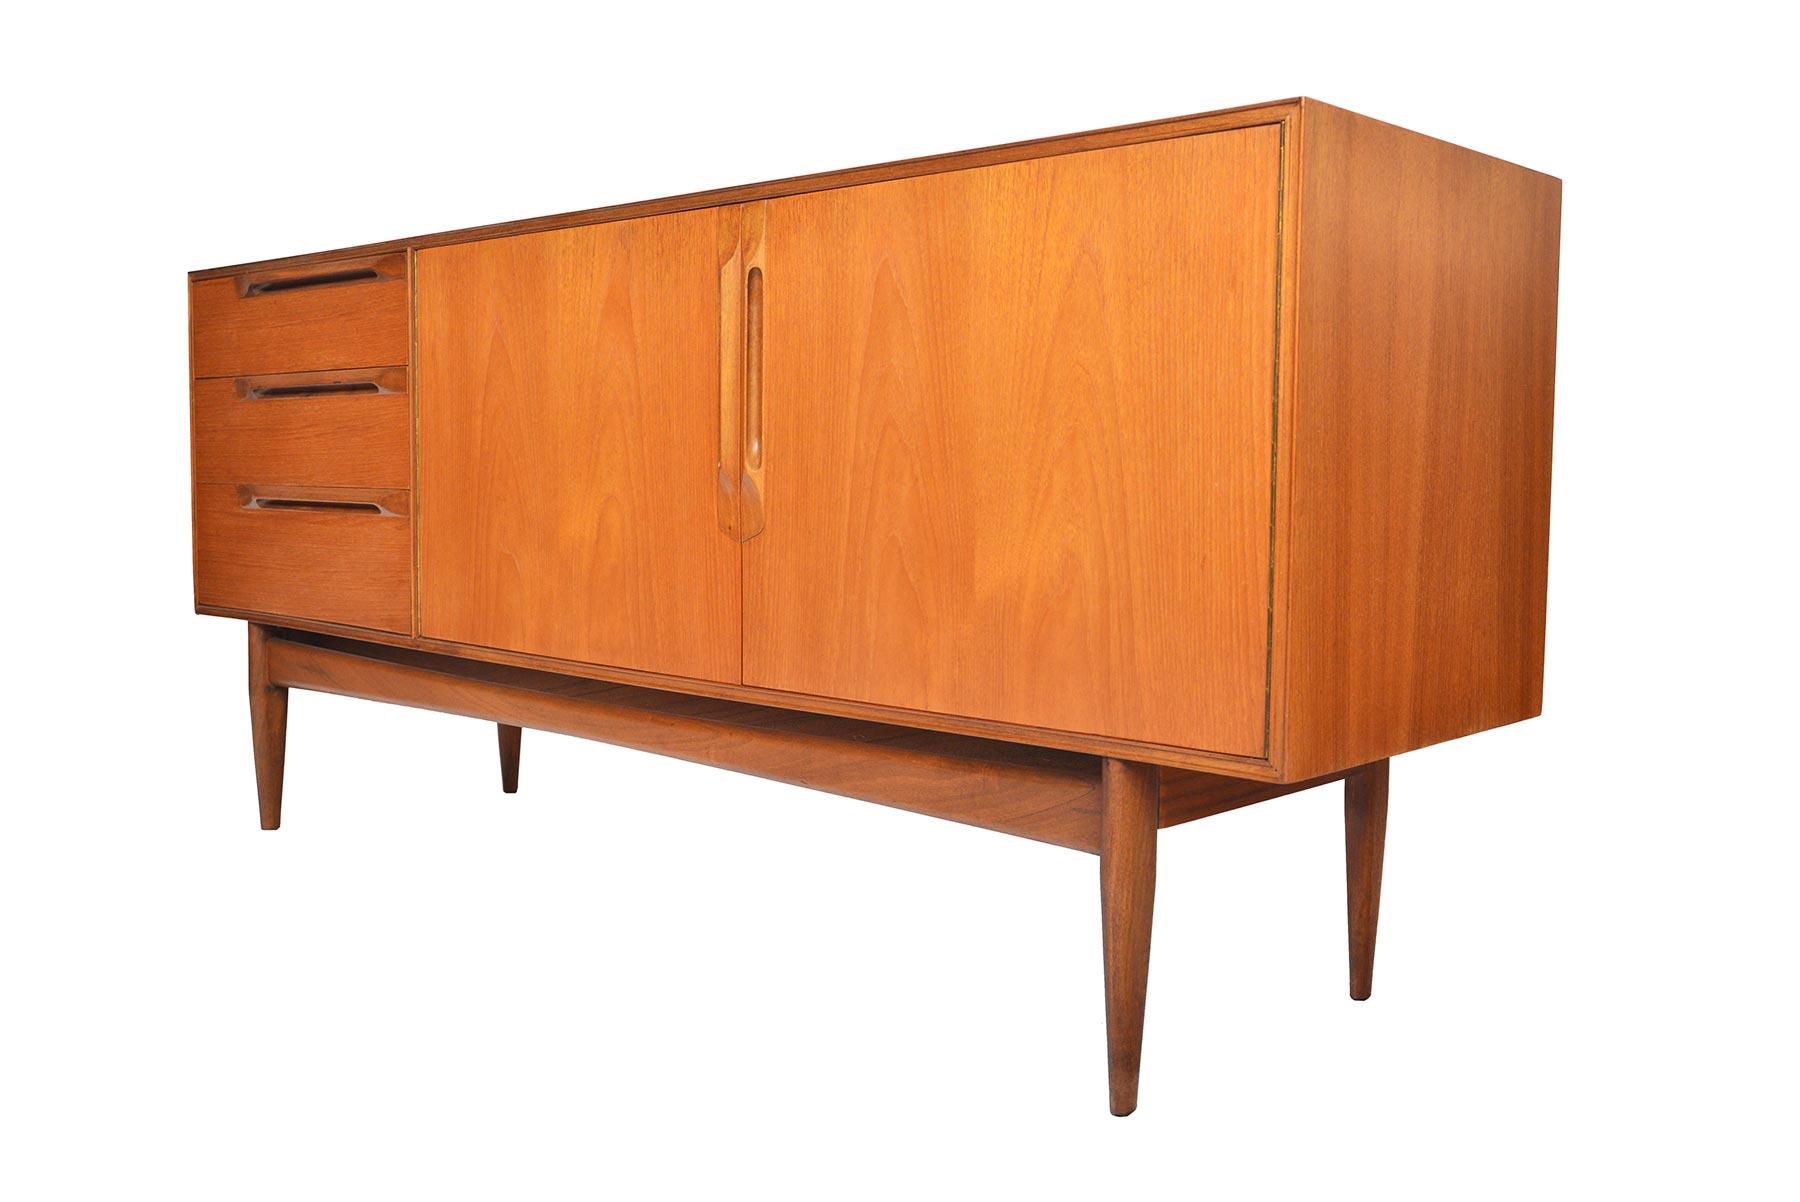 20th Century Refinished Atomic Teak Credenza by A.H. McIntosh